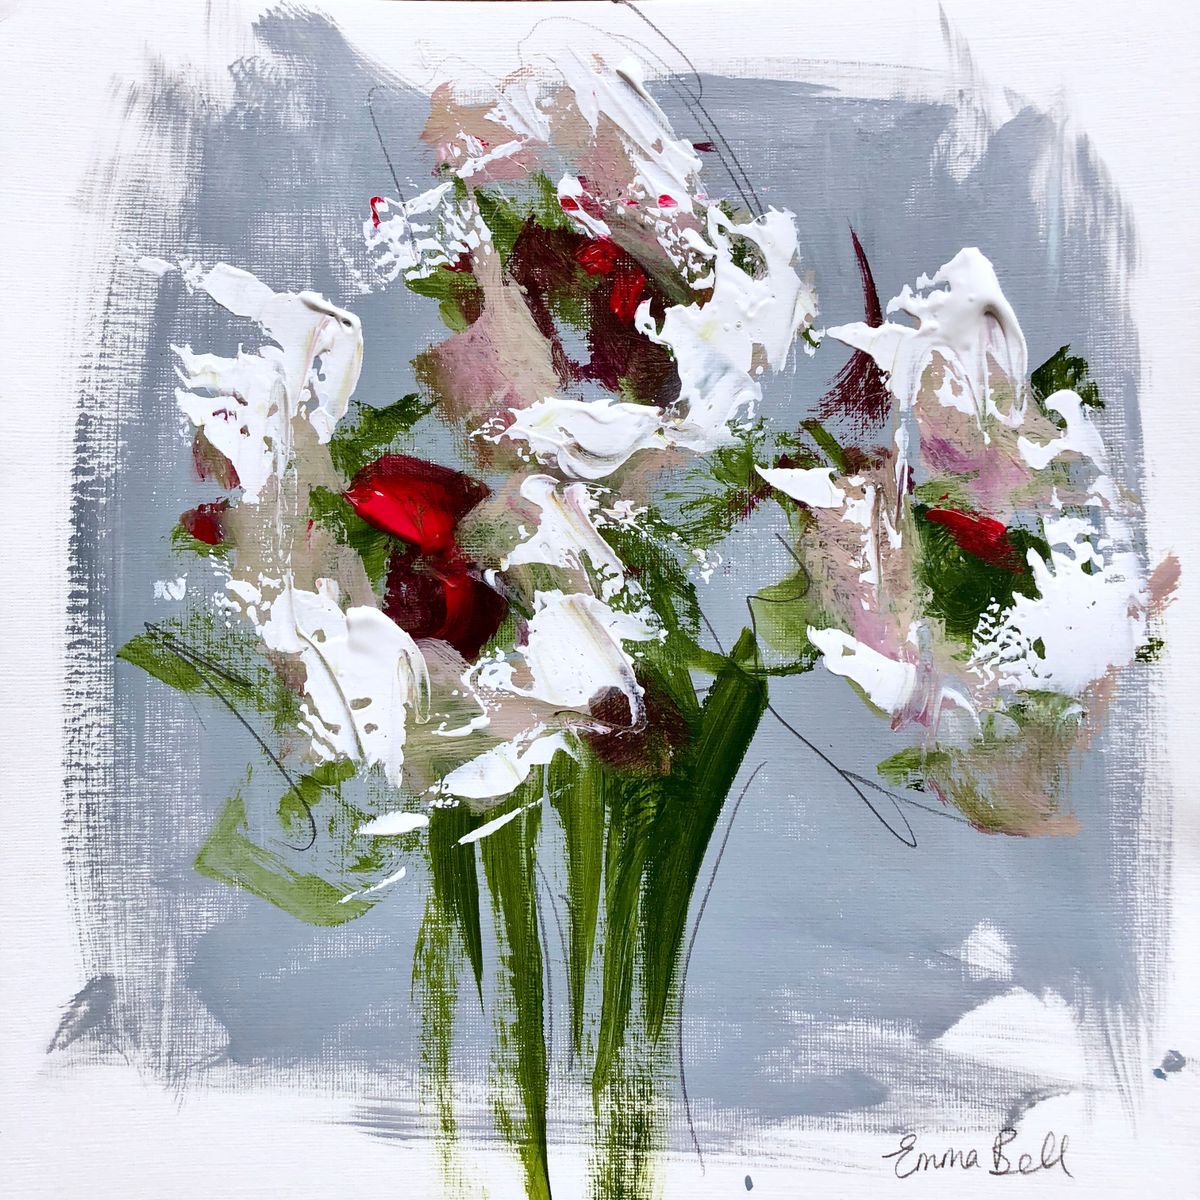 White Flower acrylic on paper by Emma Bell